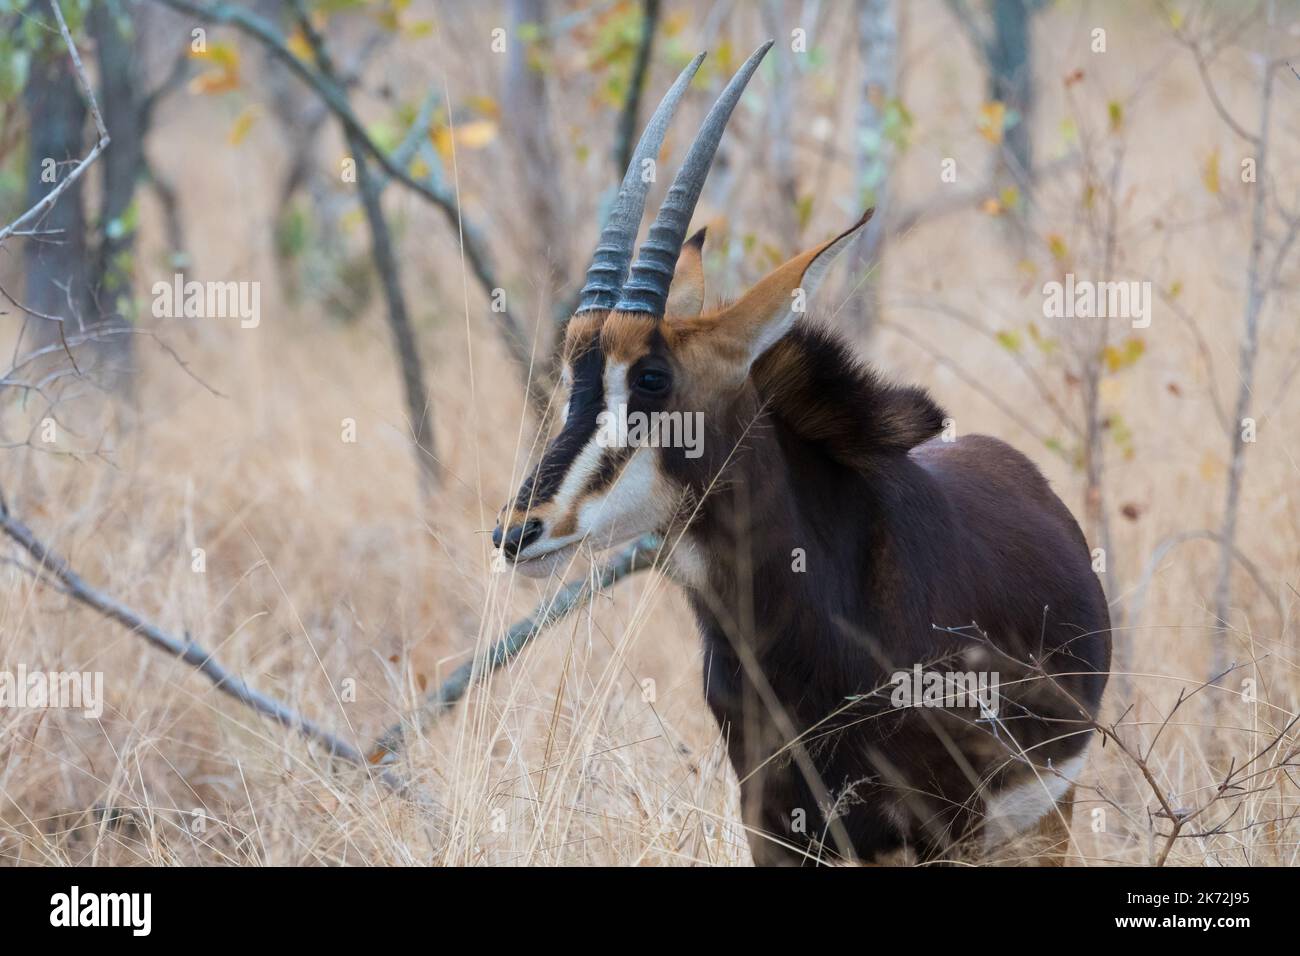 Sable antelope (Hippotragus niger) closeup of face, head, horns in the wild of Kruger national park, South Africa Stock Photo